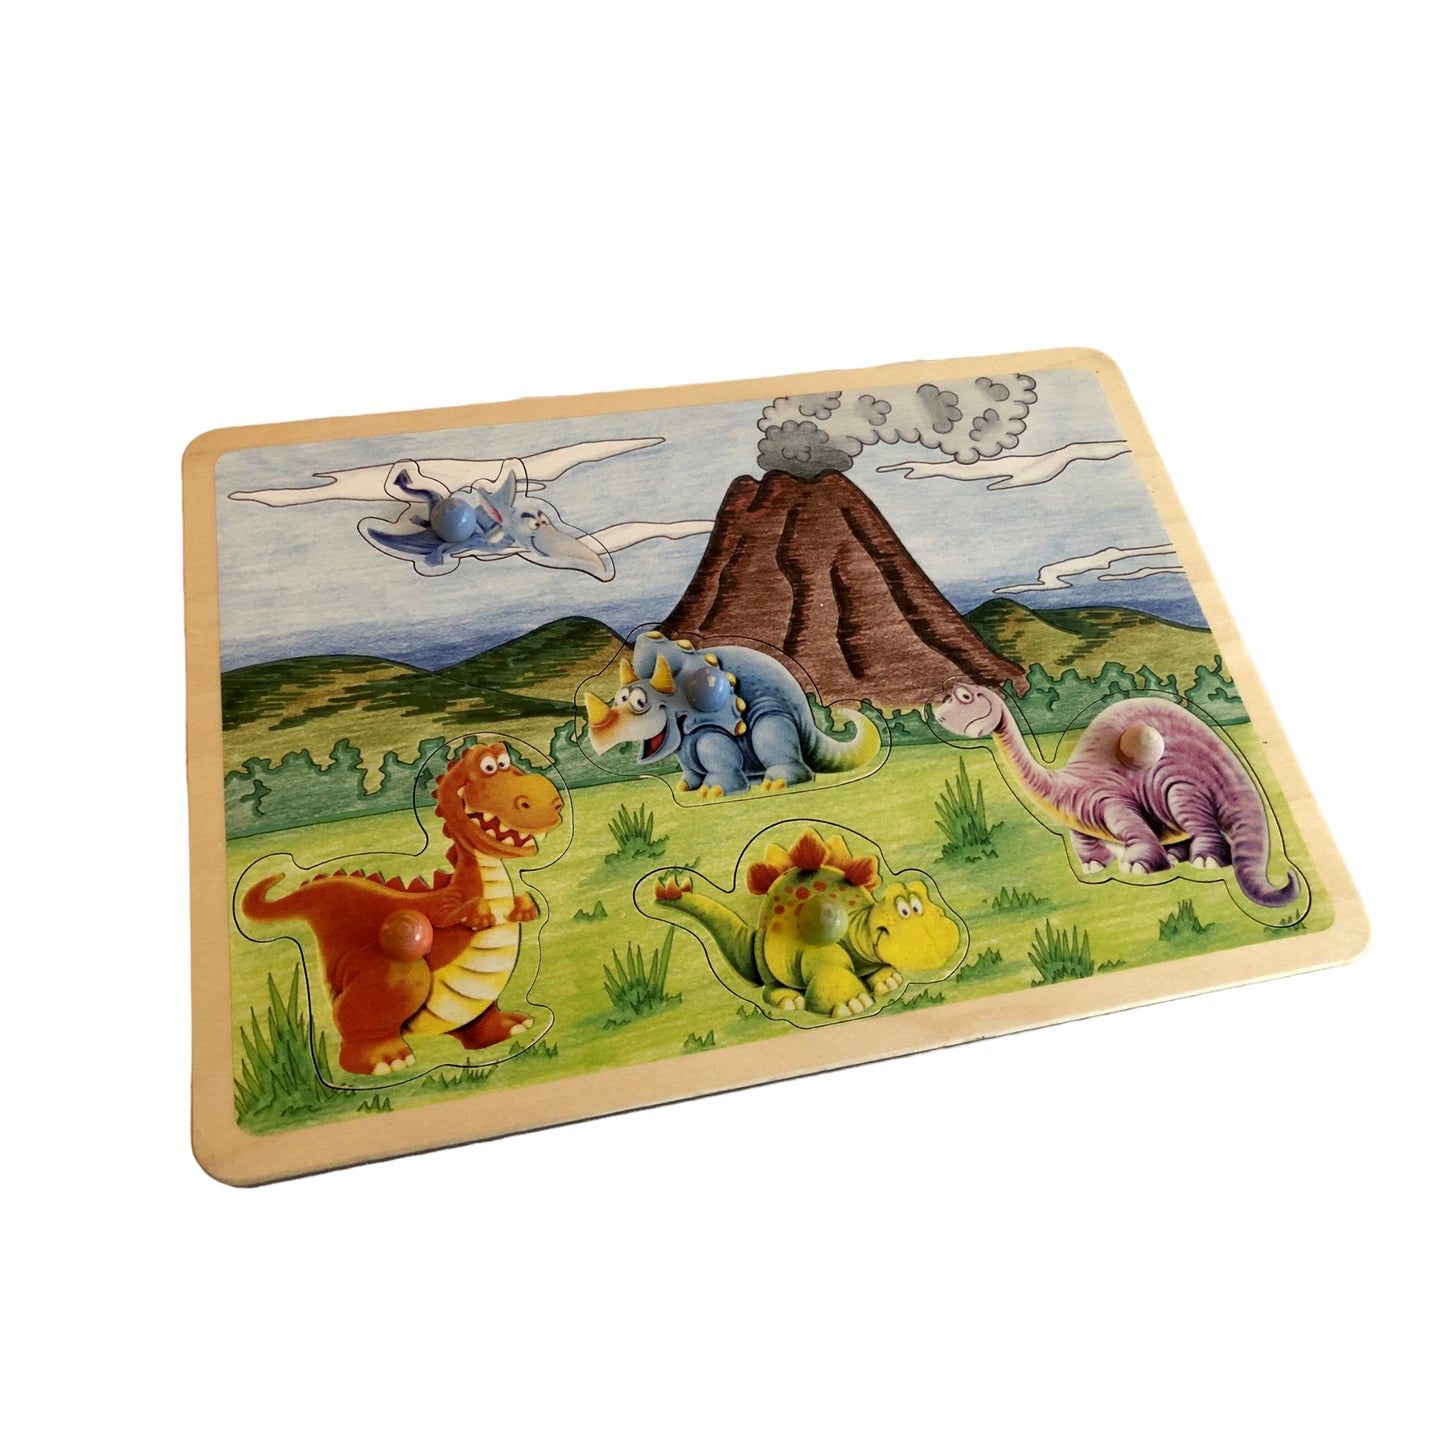 Retro wooden puzzle Dinos - 5 pieces - Swiss made